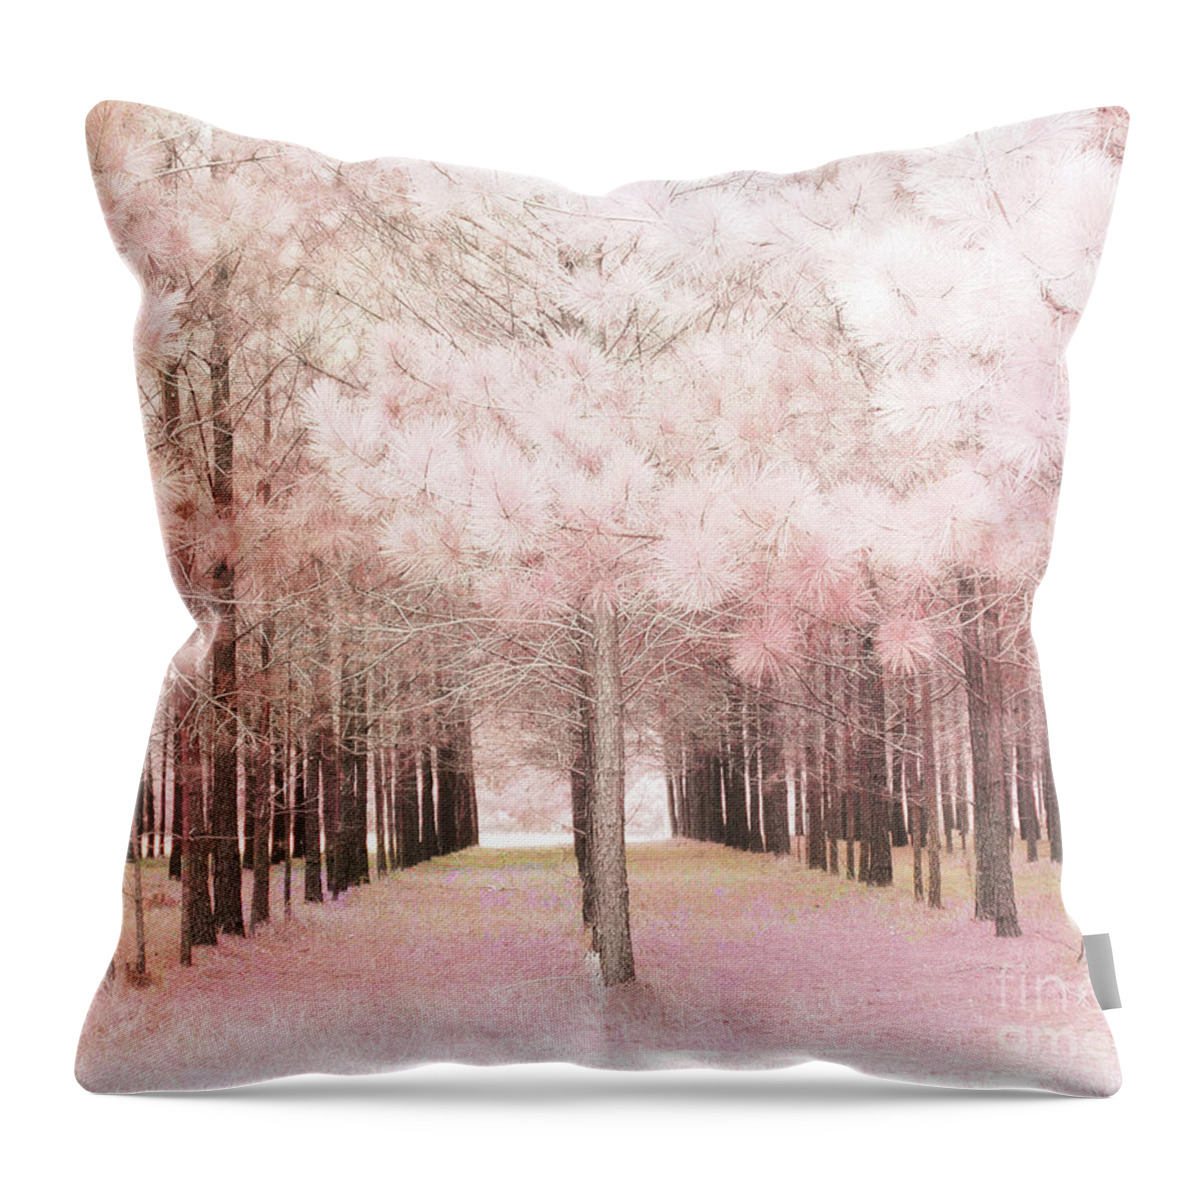 Pink Nature Photos Throw Pillow featuring the photograph Dreamy Shabby Chic Pink Nature Pink Trees Woodlands - Pink Nature Nursery Prints Decor by Kathy Fornal